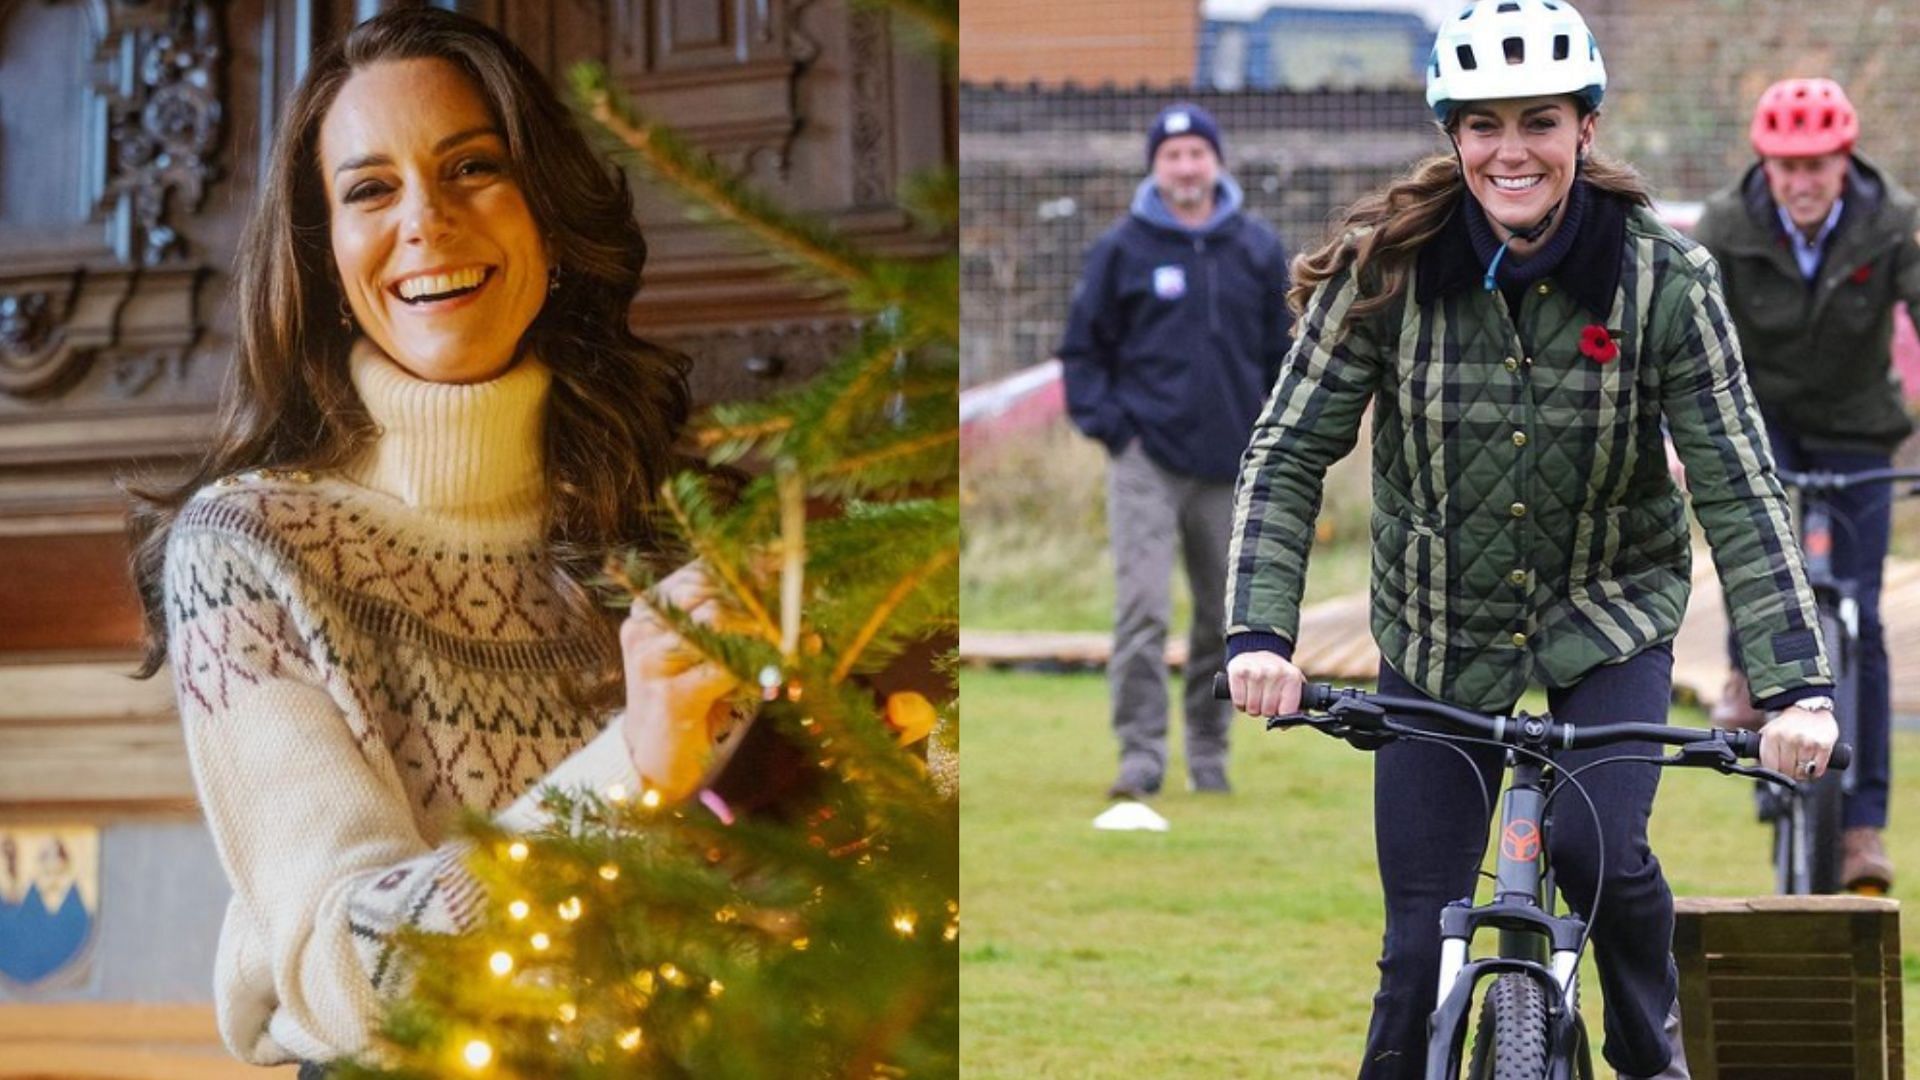 Pippa Middleton speculations surface online amidst Kate Middleton